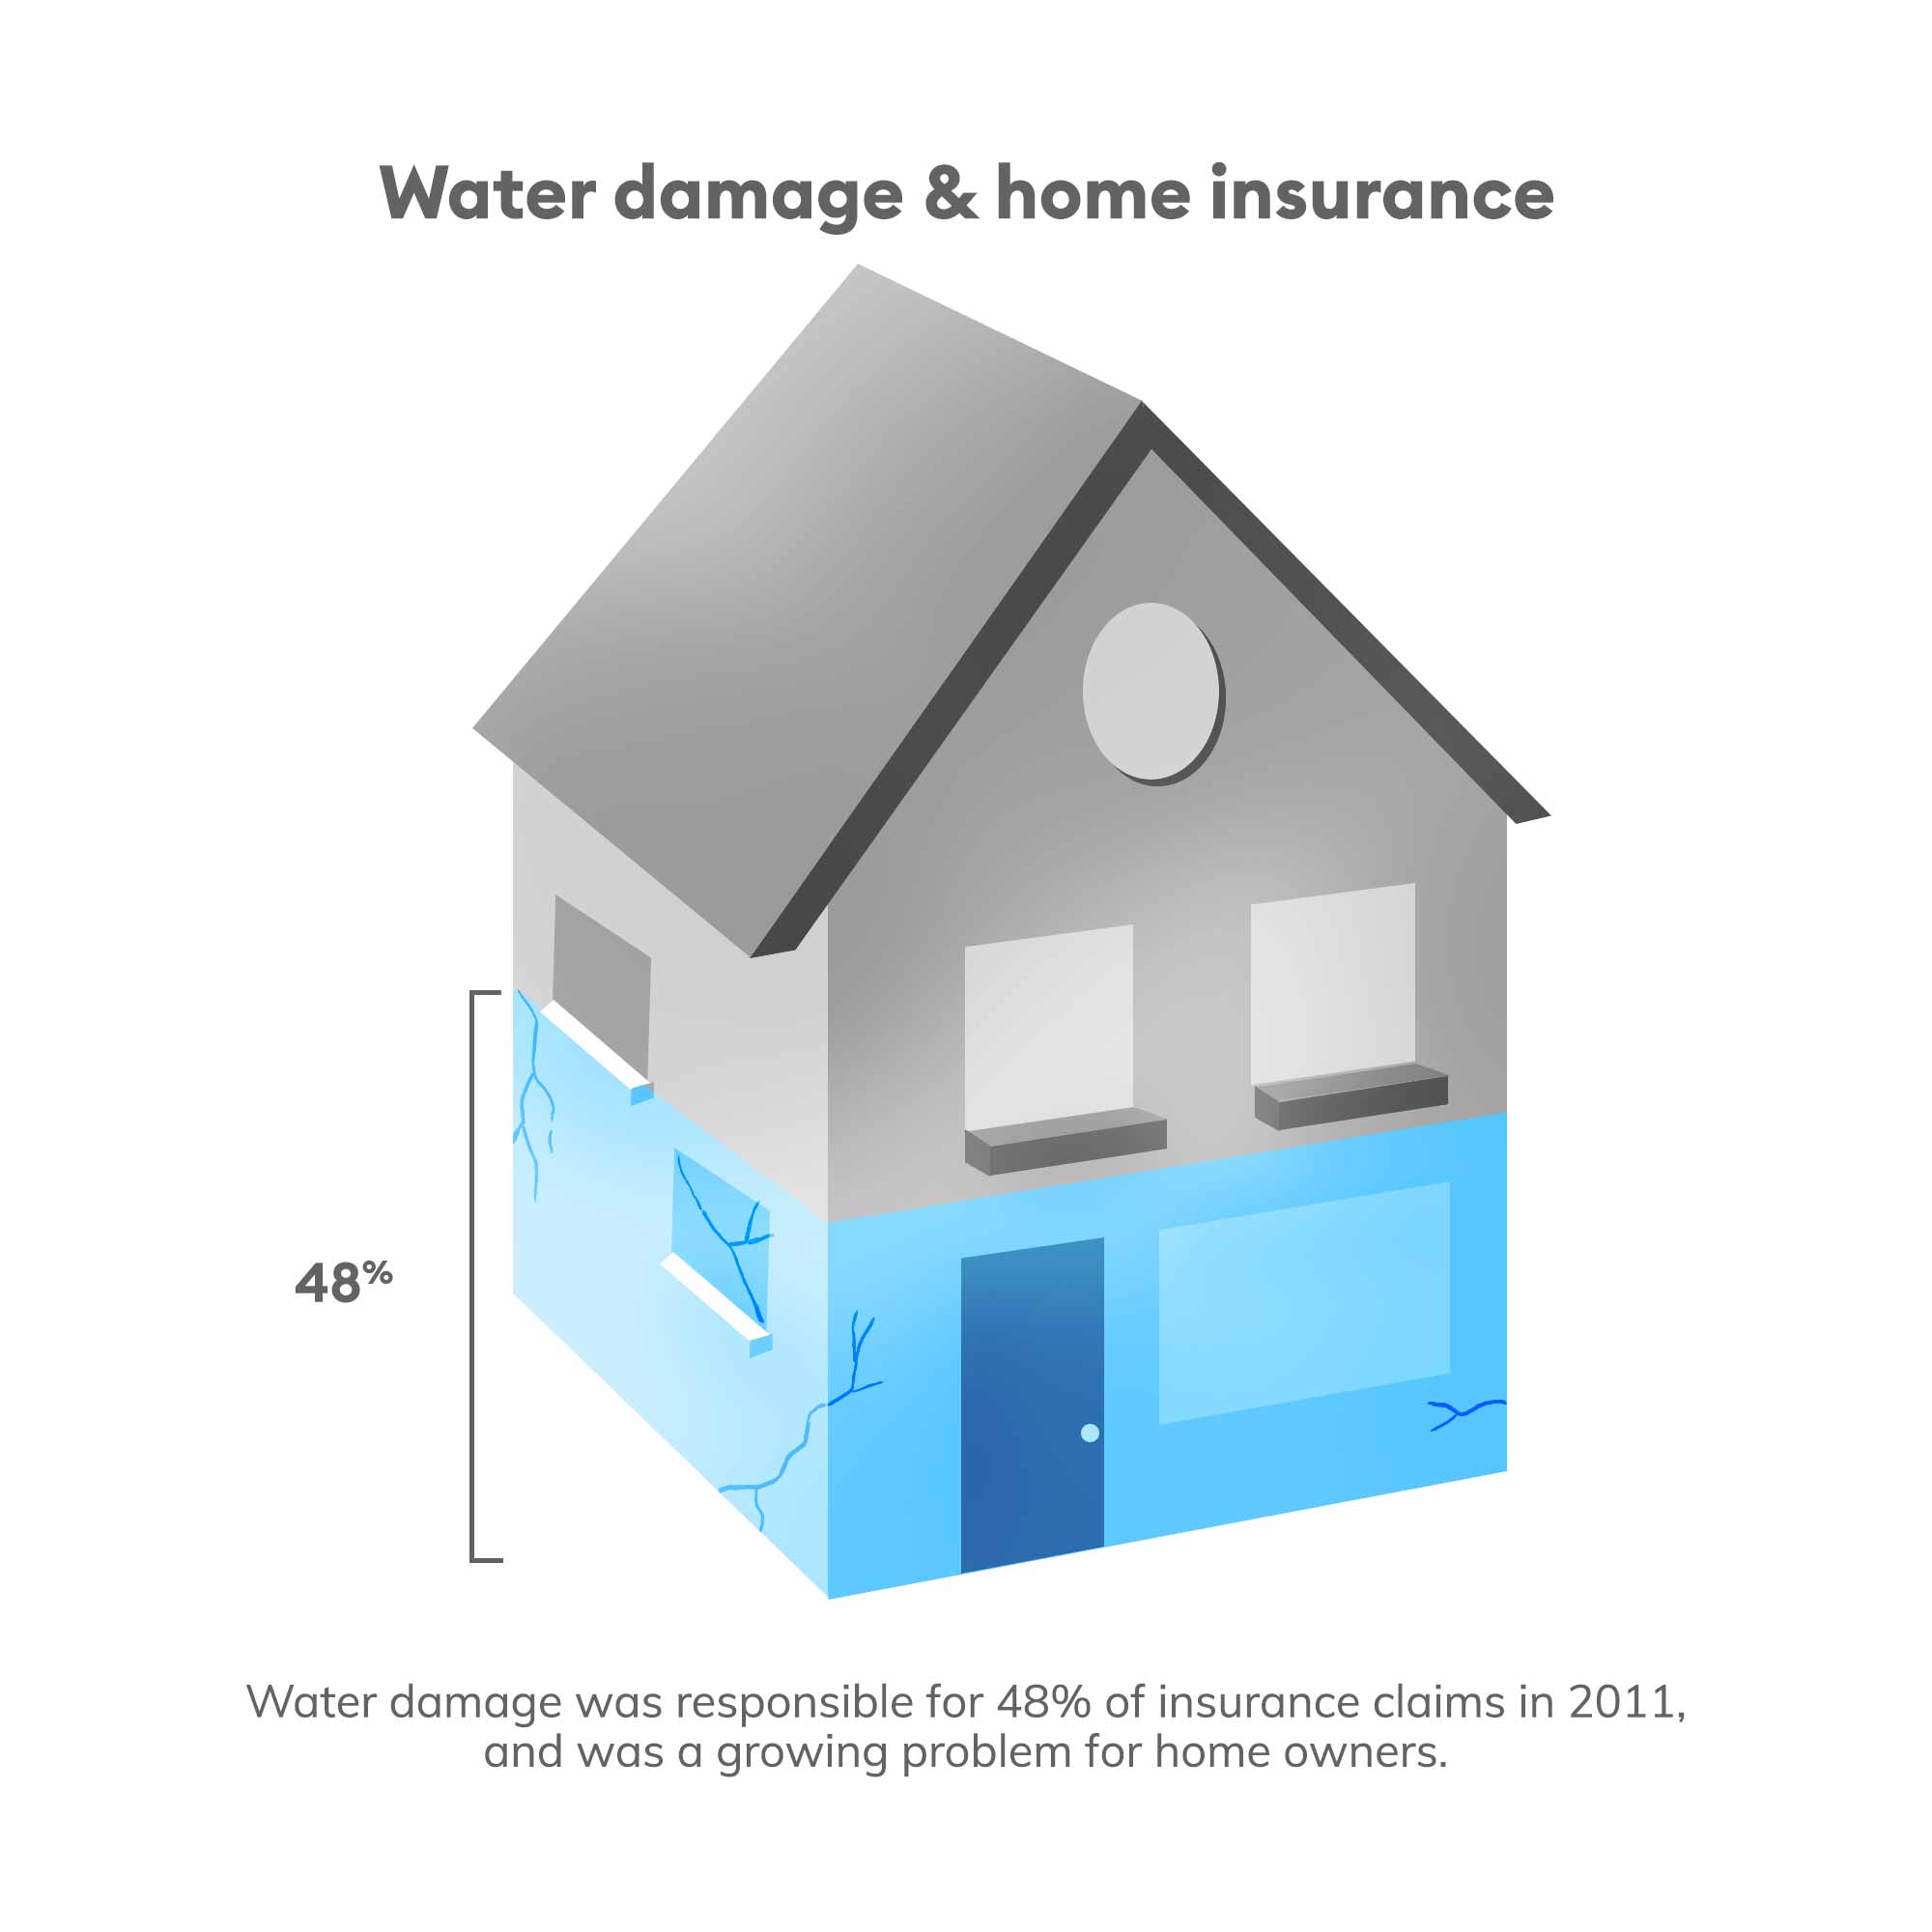 Water damage home insurance claims